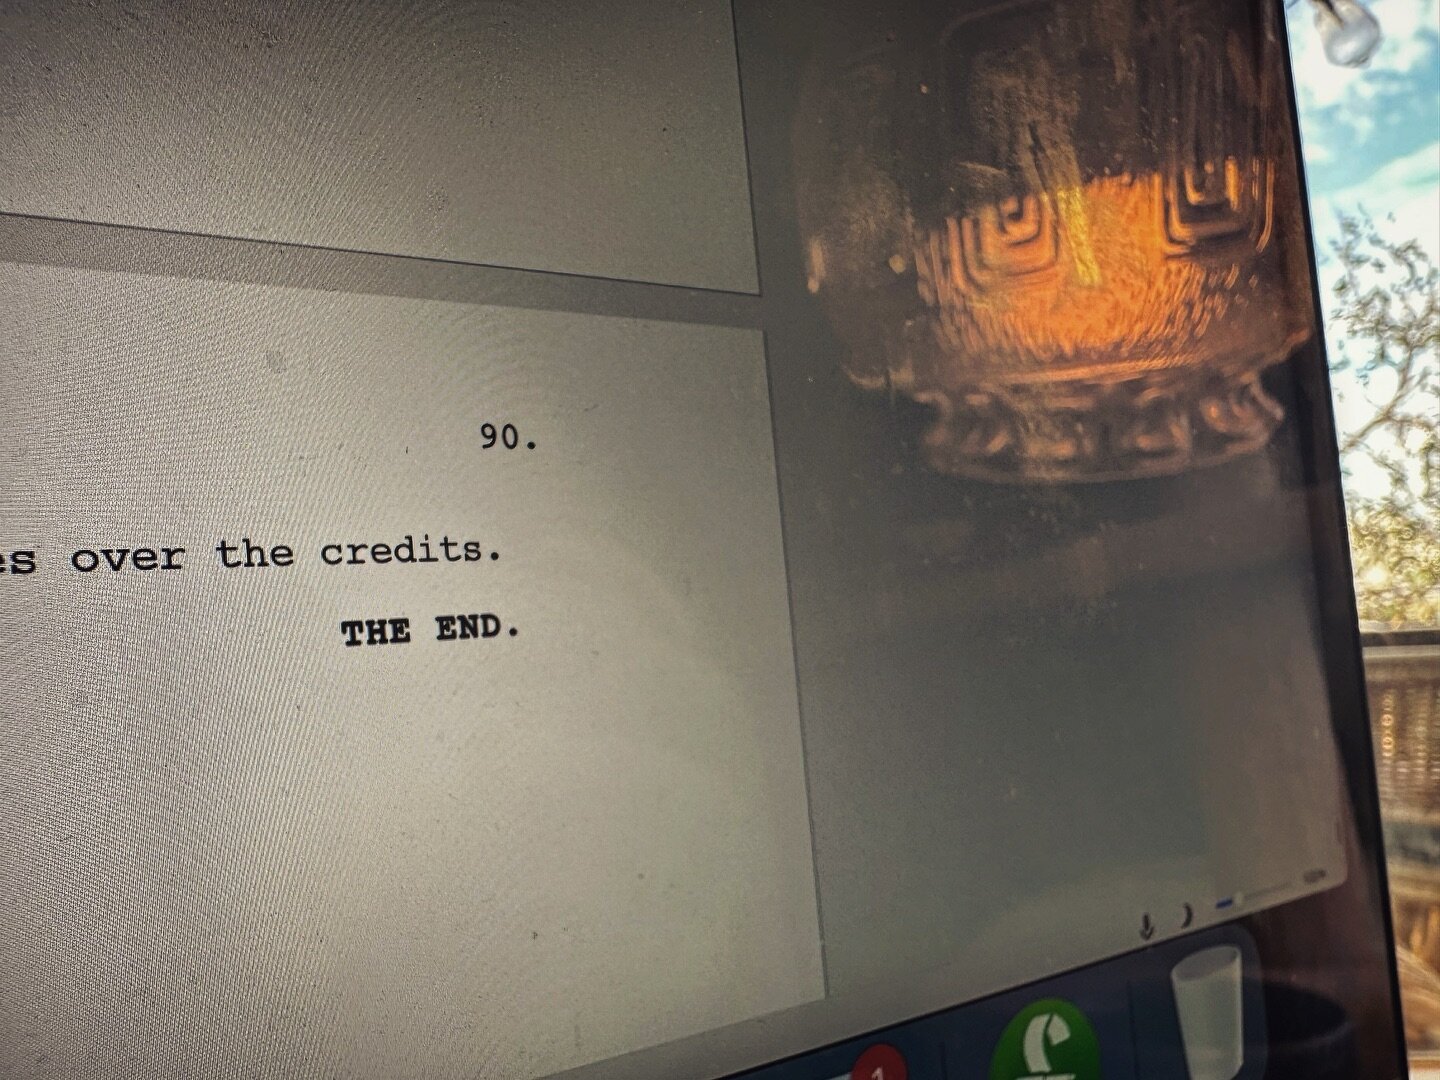 Two pretty golden words to get to type. ✍️
.
.
.
#filmmaker #script #writer #screenplay #writing #theend